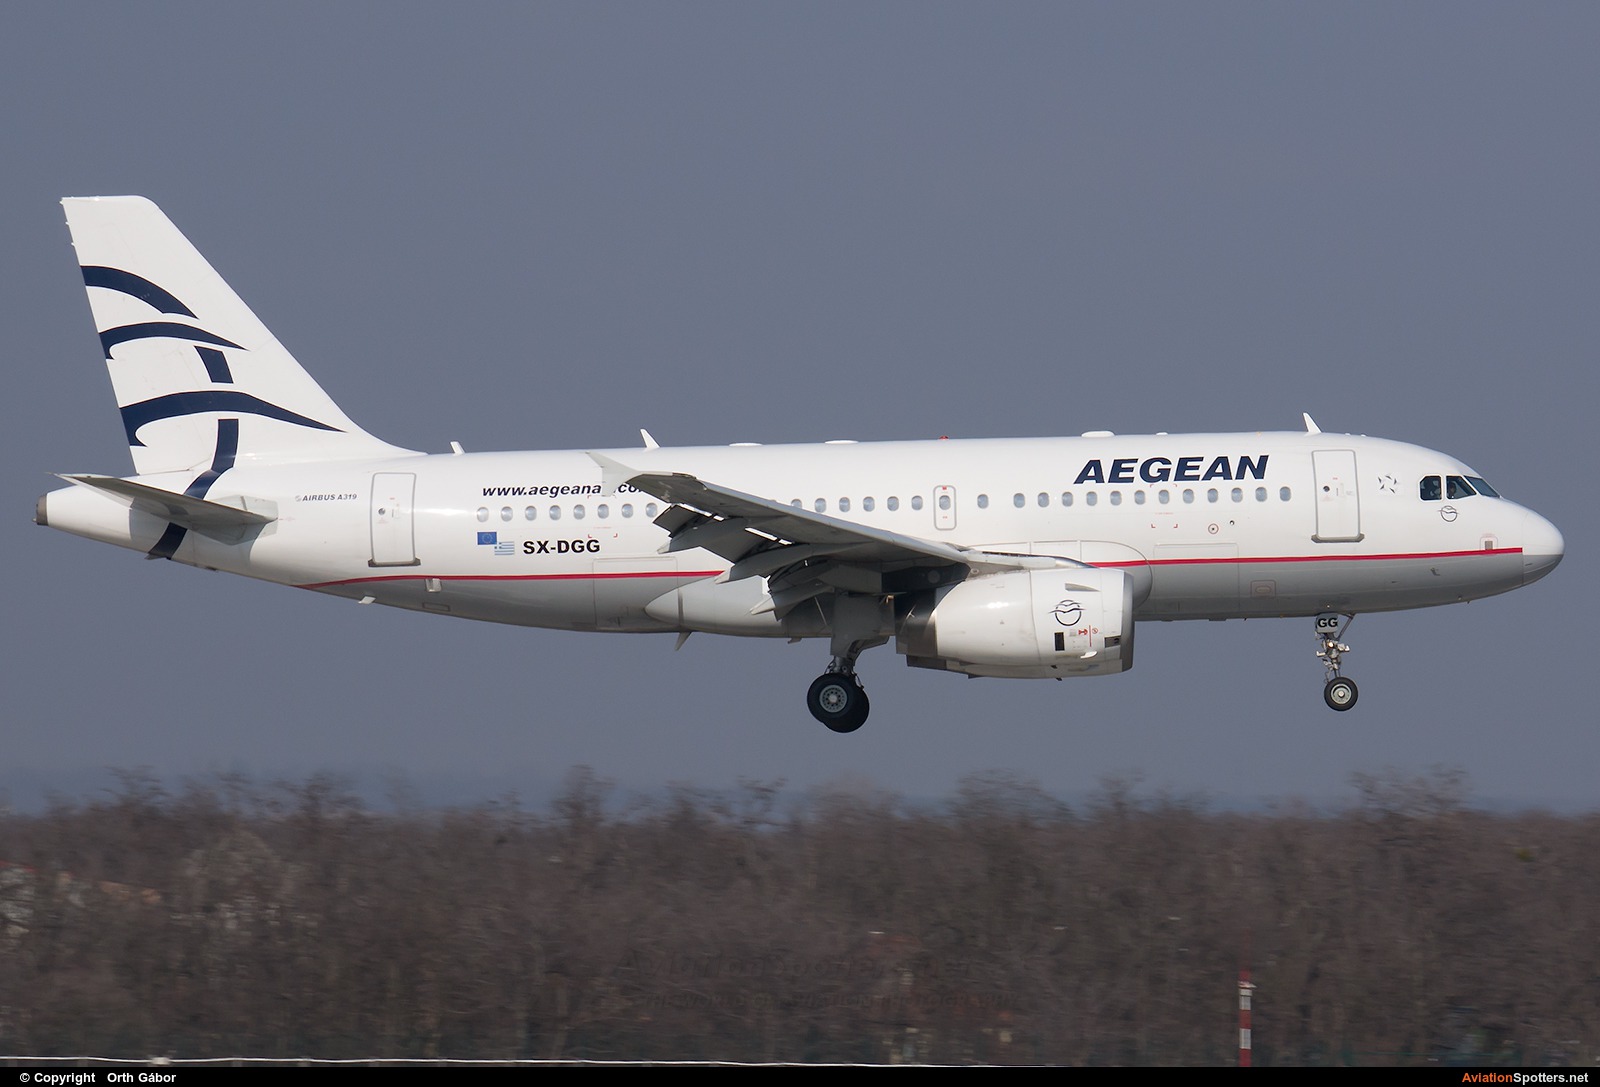 Aegean Airlines  -  A319  (SX-DGG) By Orth Gábor (Roodkop)